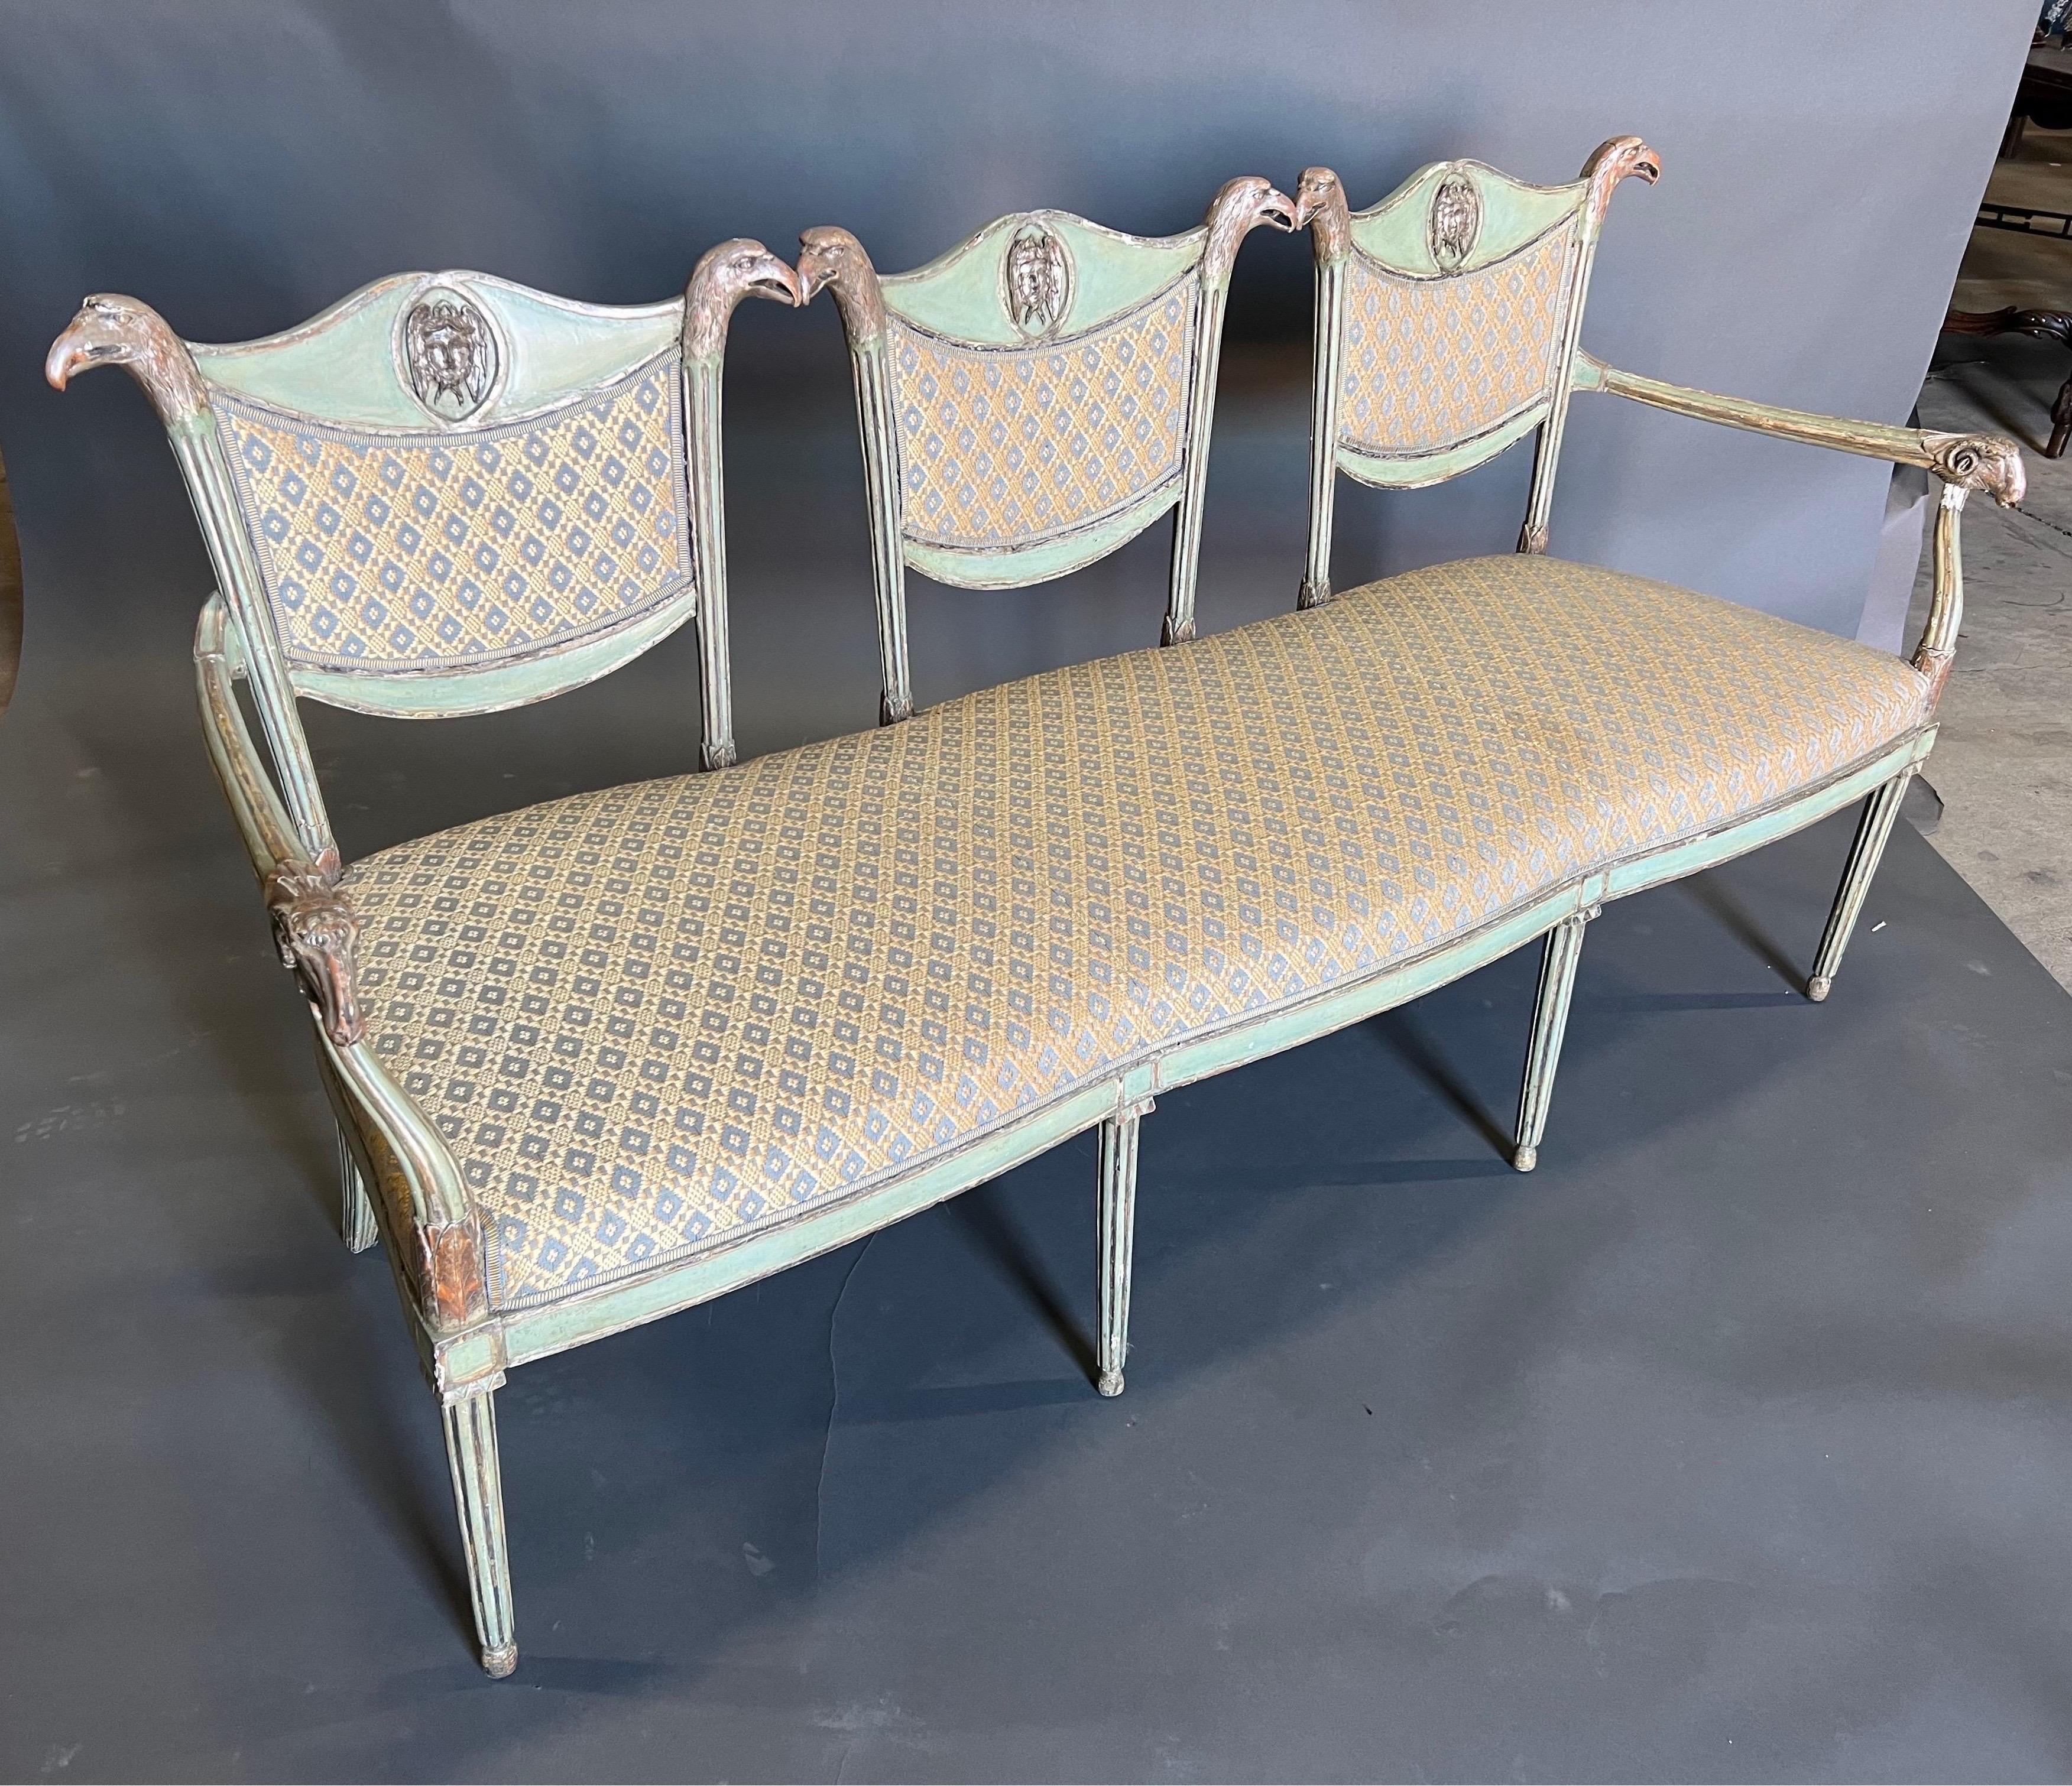 Gorgeous carving and silver leaf on the eagles and rams heads of this fine 19th century French or Russian Neoclassical settee. The light green paint is soft enough and compliments the silver leafed eagles and rams heads. The rams heads finish the